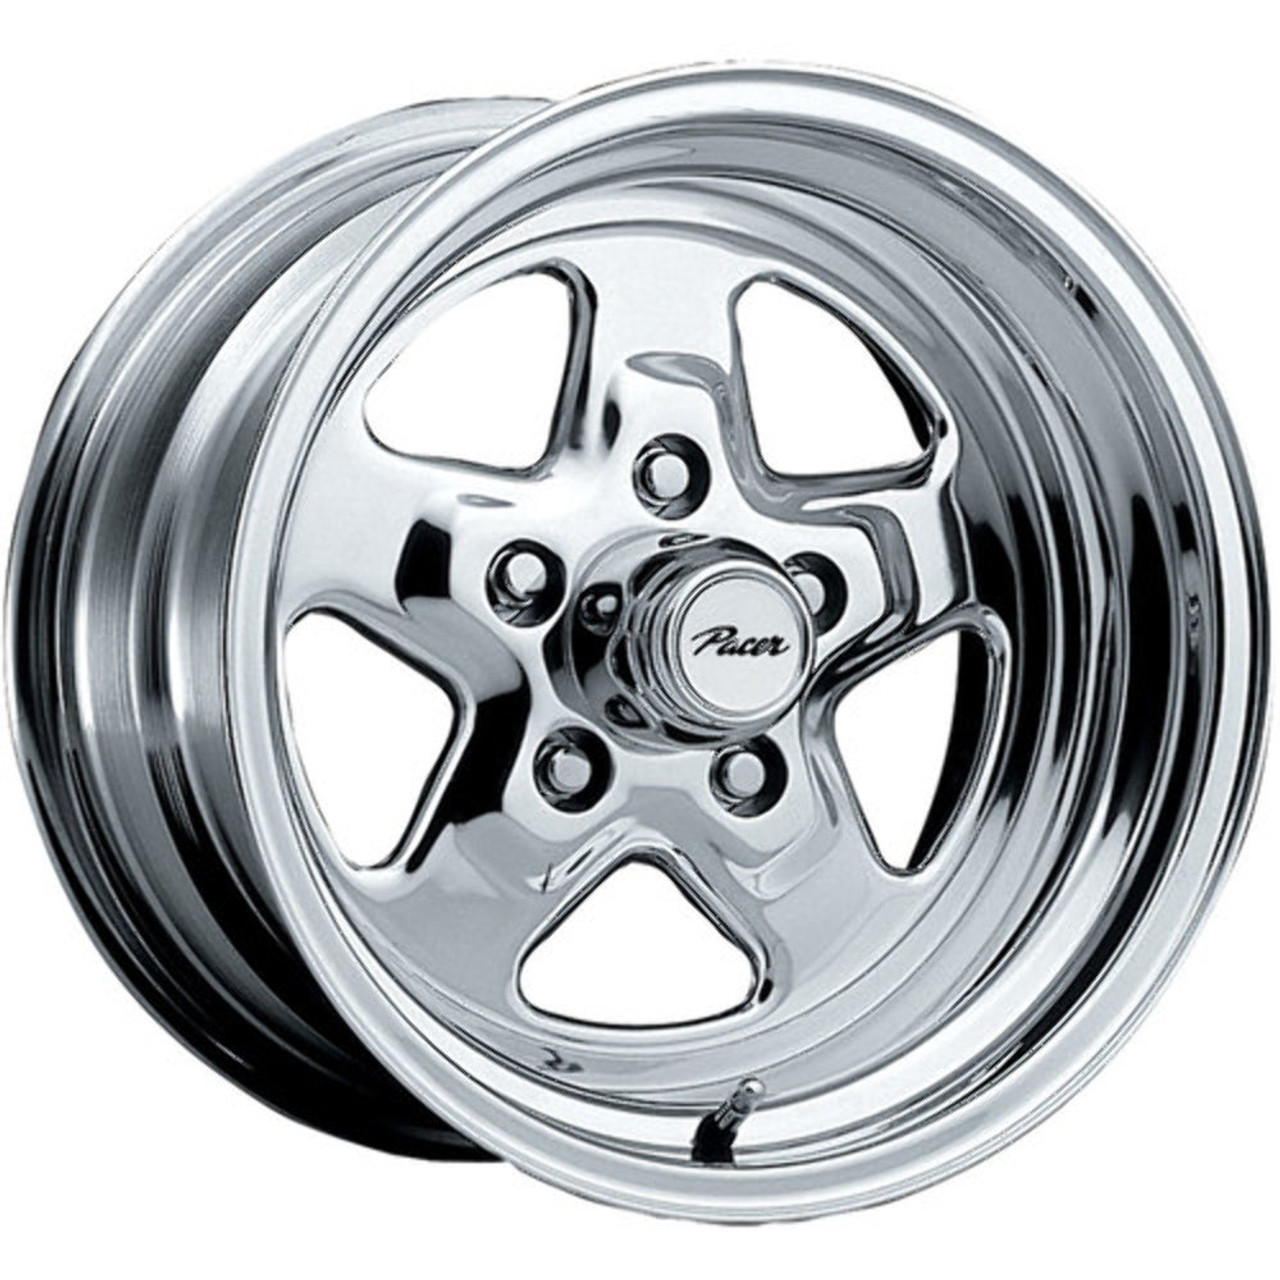 Set 4 15" Pacer 521P Dragstar 15X7 5x4.5 Polished Wheels 0mm Rims